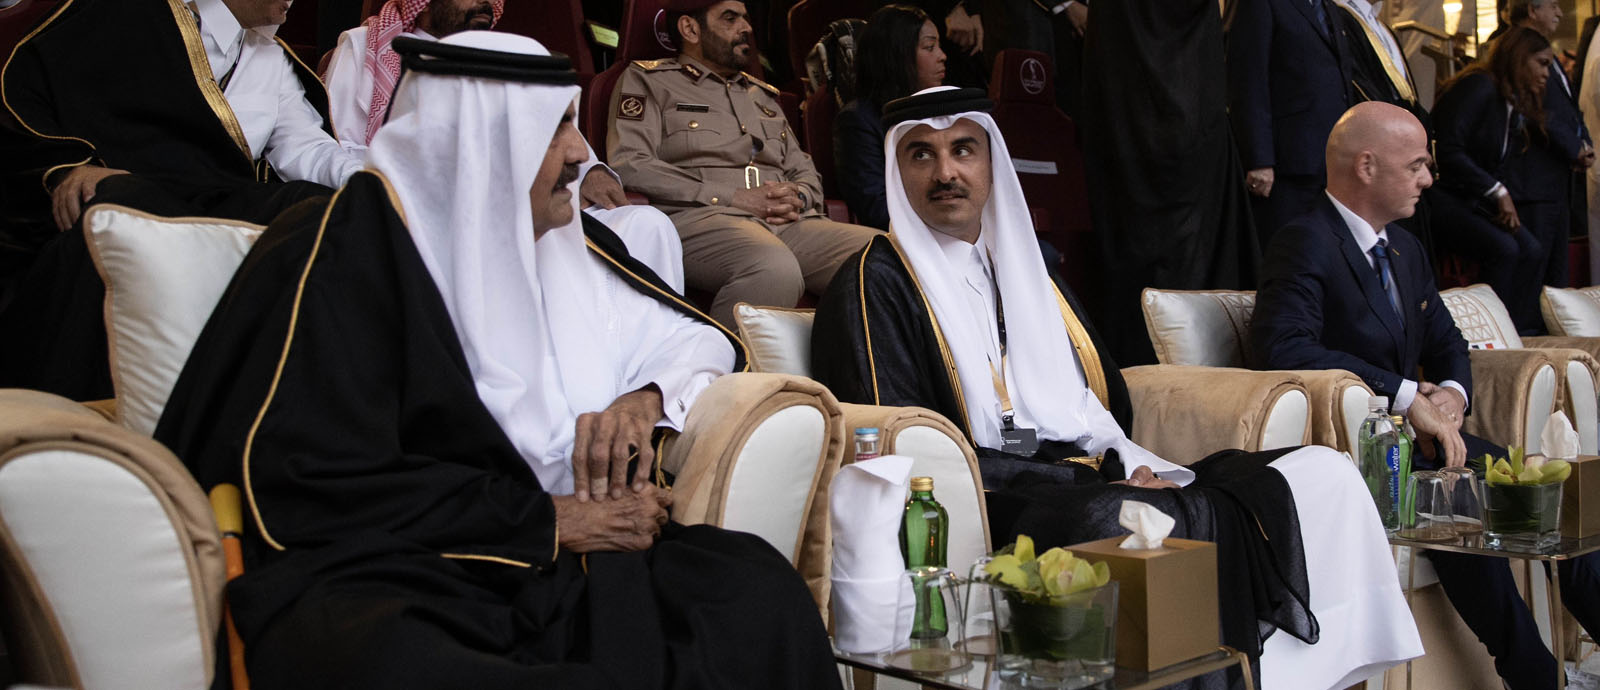 HH the Amir Attends Closing Ceremony of FIFA World Cup Qatar 2022